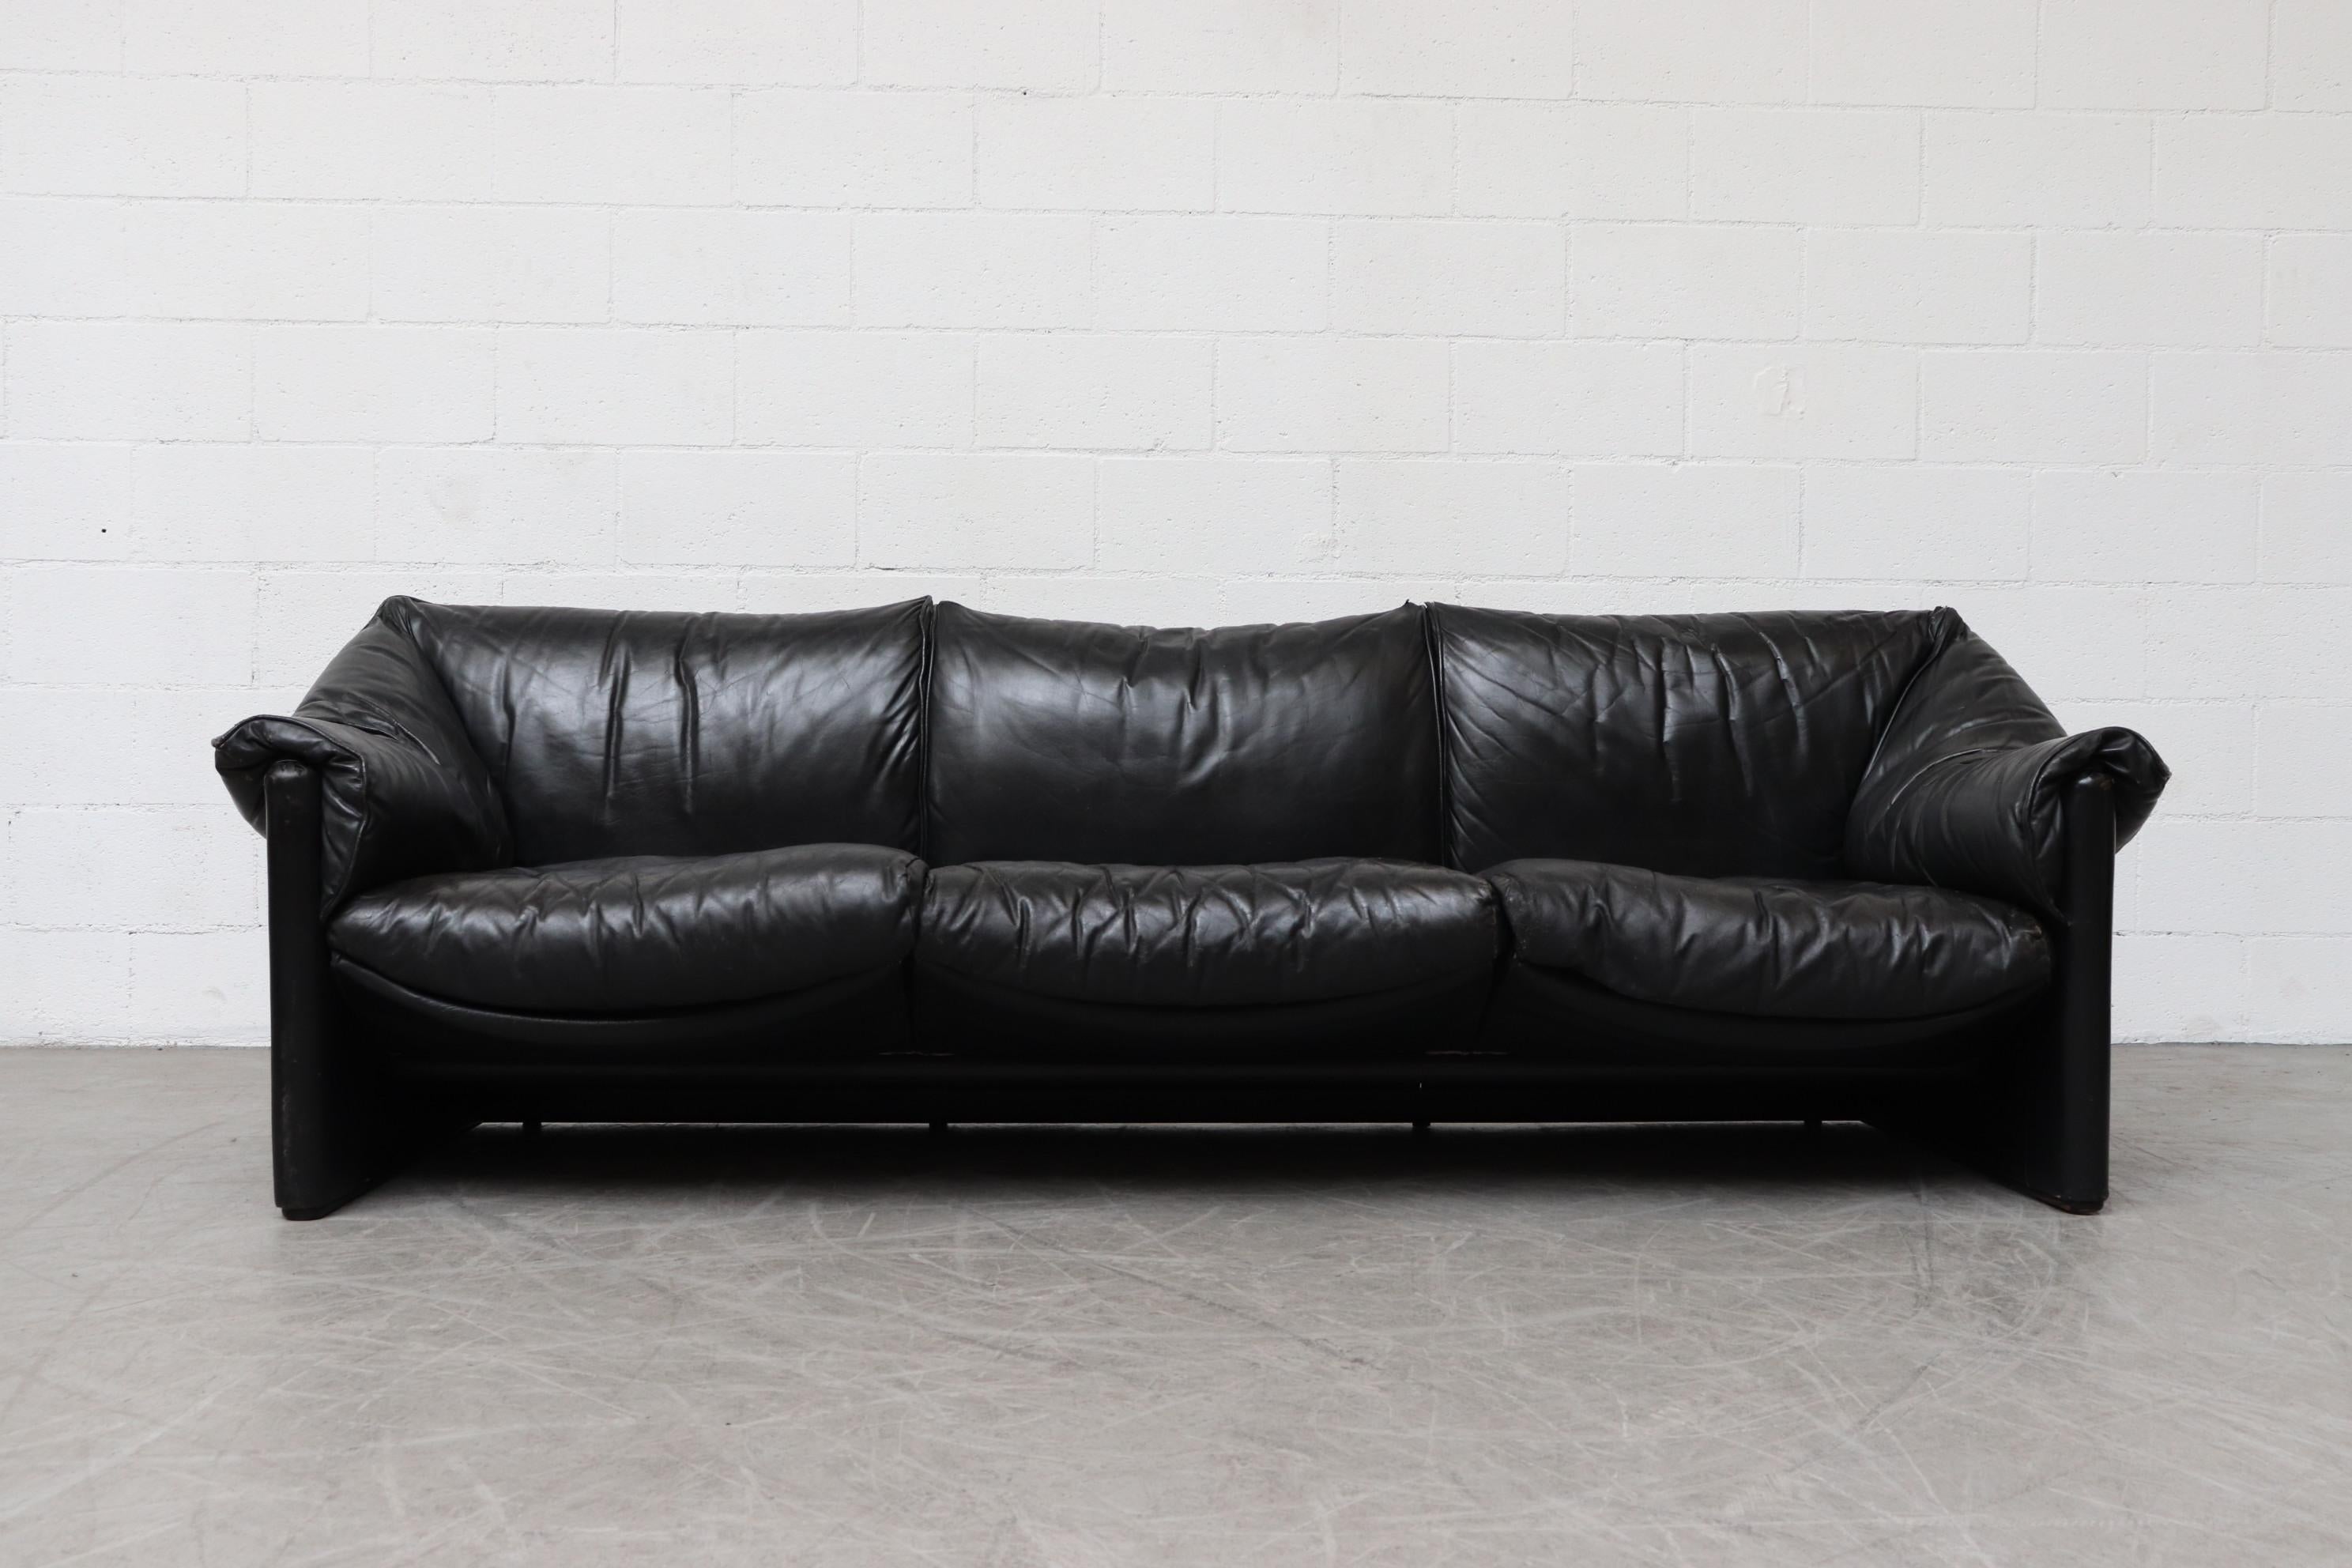 Handsome black leather 3-seat sofa designed by Mario Bellini for Cassina. Well worn with nice heavy patina. In original condition with visible signs of wear.